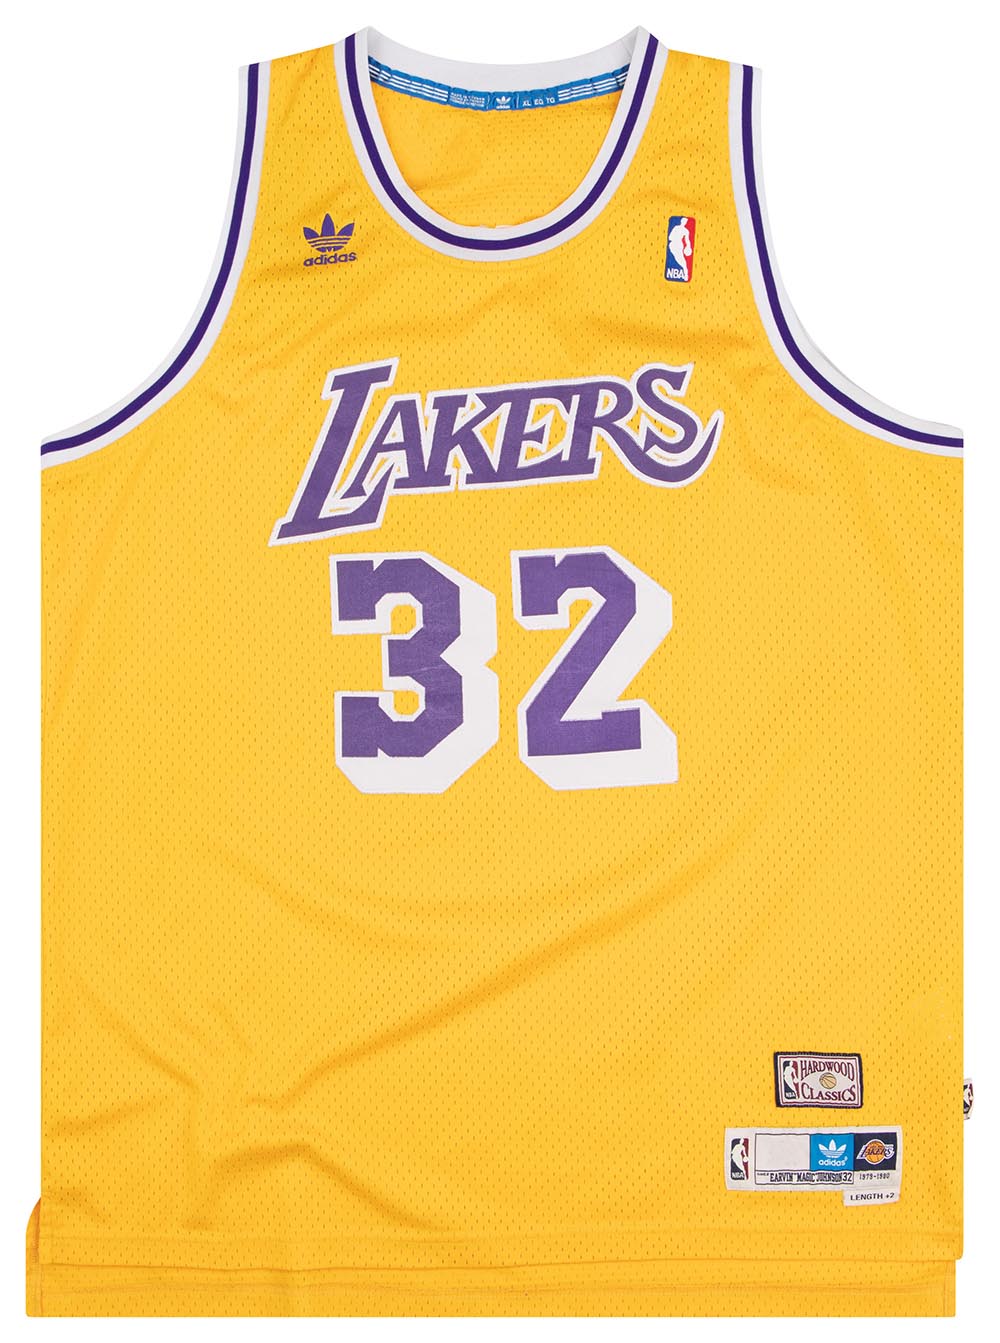 1980 lakers jersey